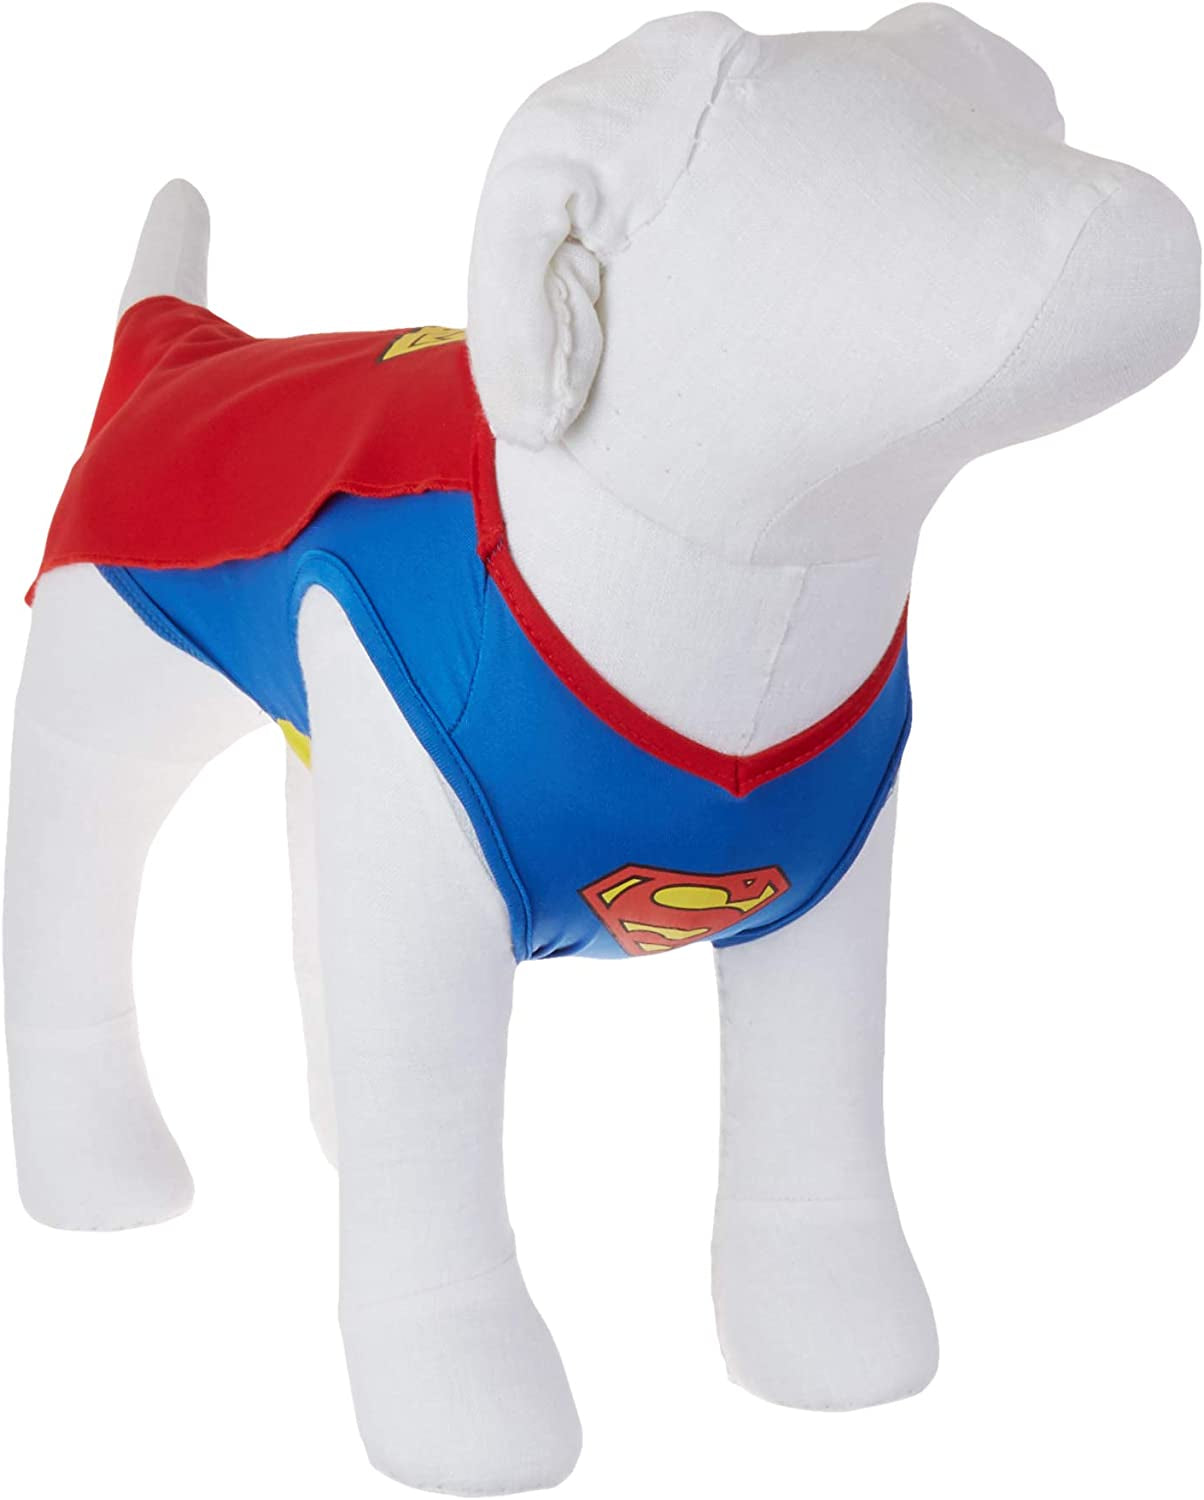 DC Comics Superman Dog Costume, Small (S) | Superhero Costume for Dogs | Red and Blue Dog Halloween Costumes for Small Dogs with Superman Cape | See Sizing Chart for Details Animals & Pet Supplies > Pet Supplies > Dog Supplies > Dog Apparel Fetch for Pets XS  